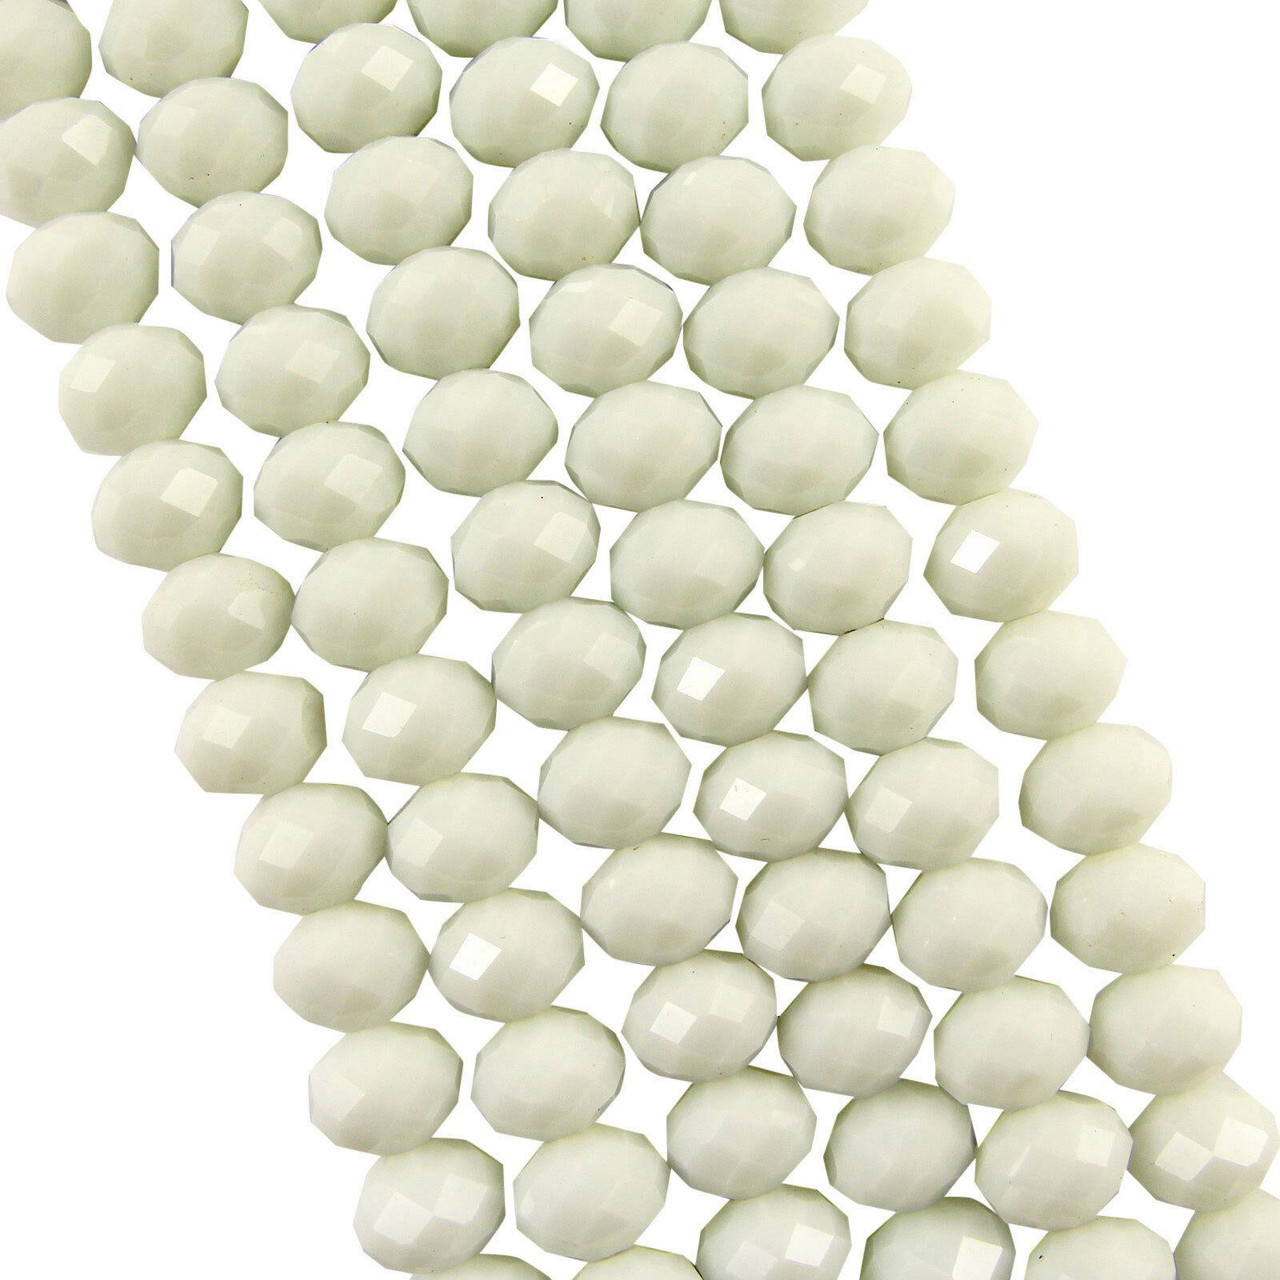 8x6mm Faceted Glass Rondelles - WHITE OPAQUE - approx 72 beads / 17 inch strand